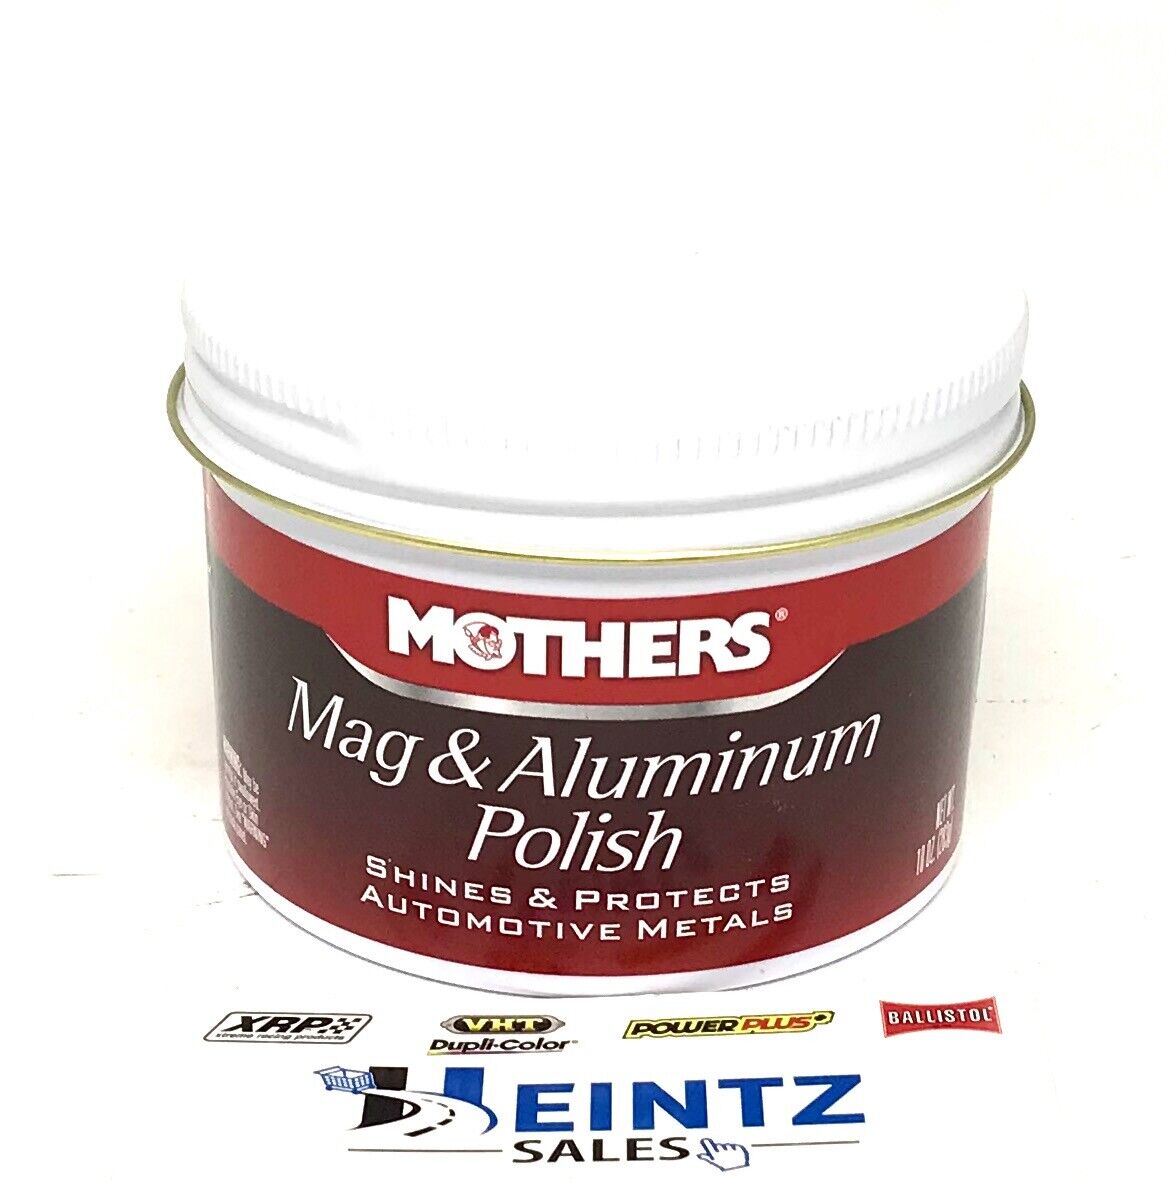 Mothers Mag & Aluminum Polish 5 • See best price »